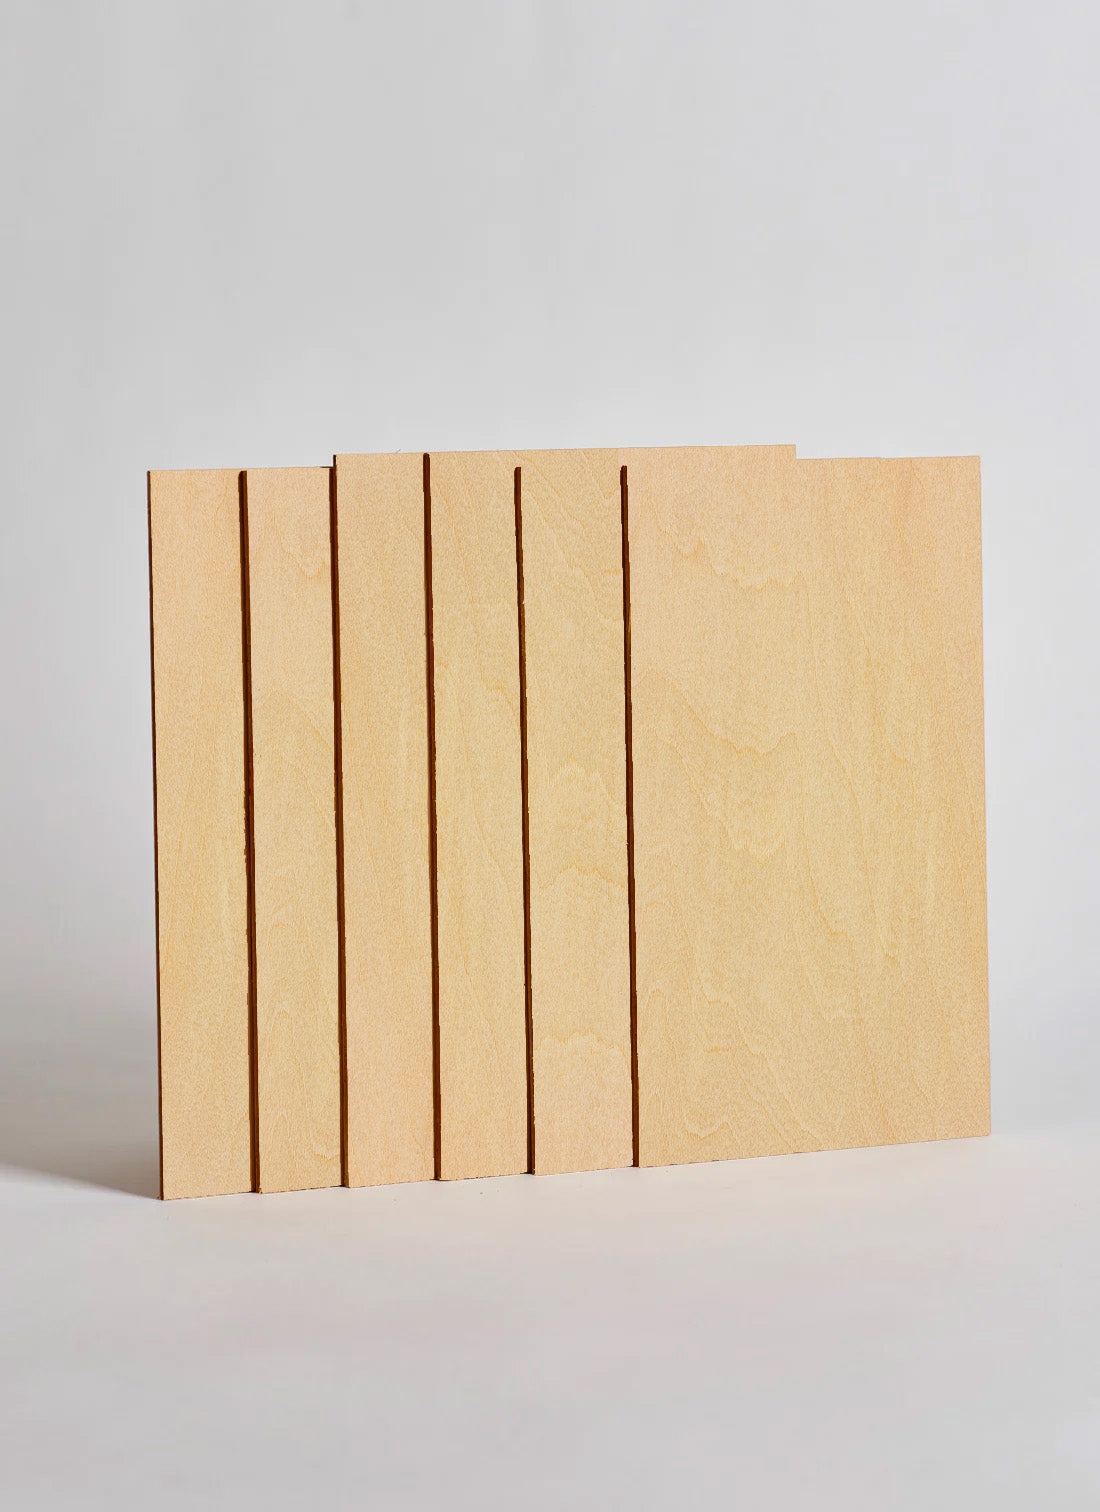 Plyco's 3mm Basswood Laserply Craft Pack, containing six sheets, on a white background